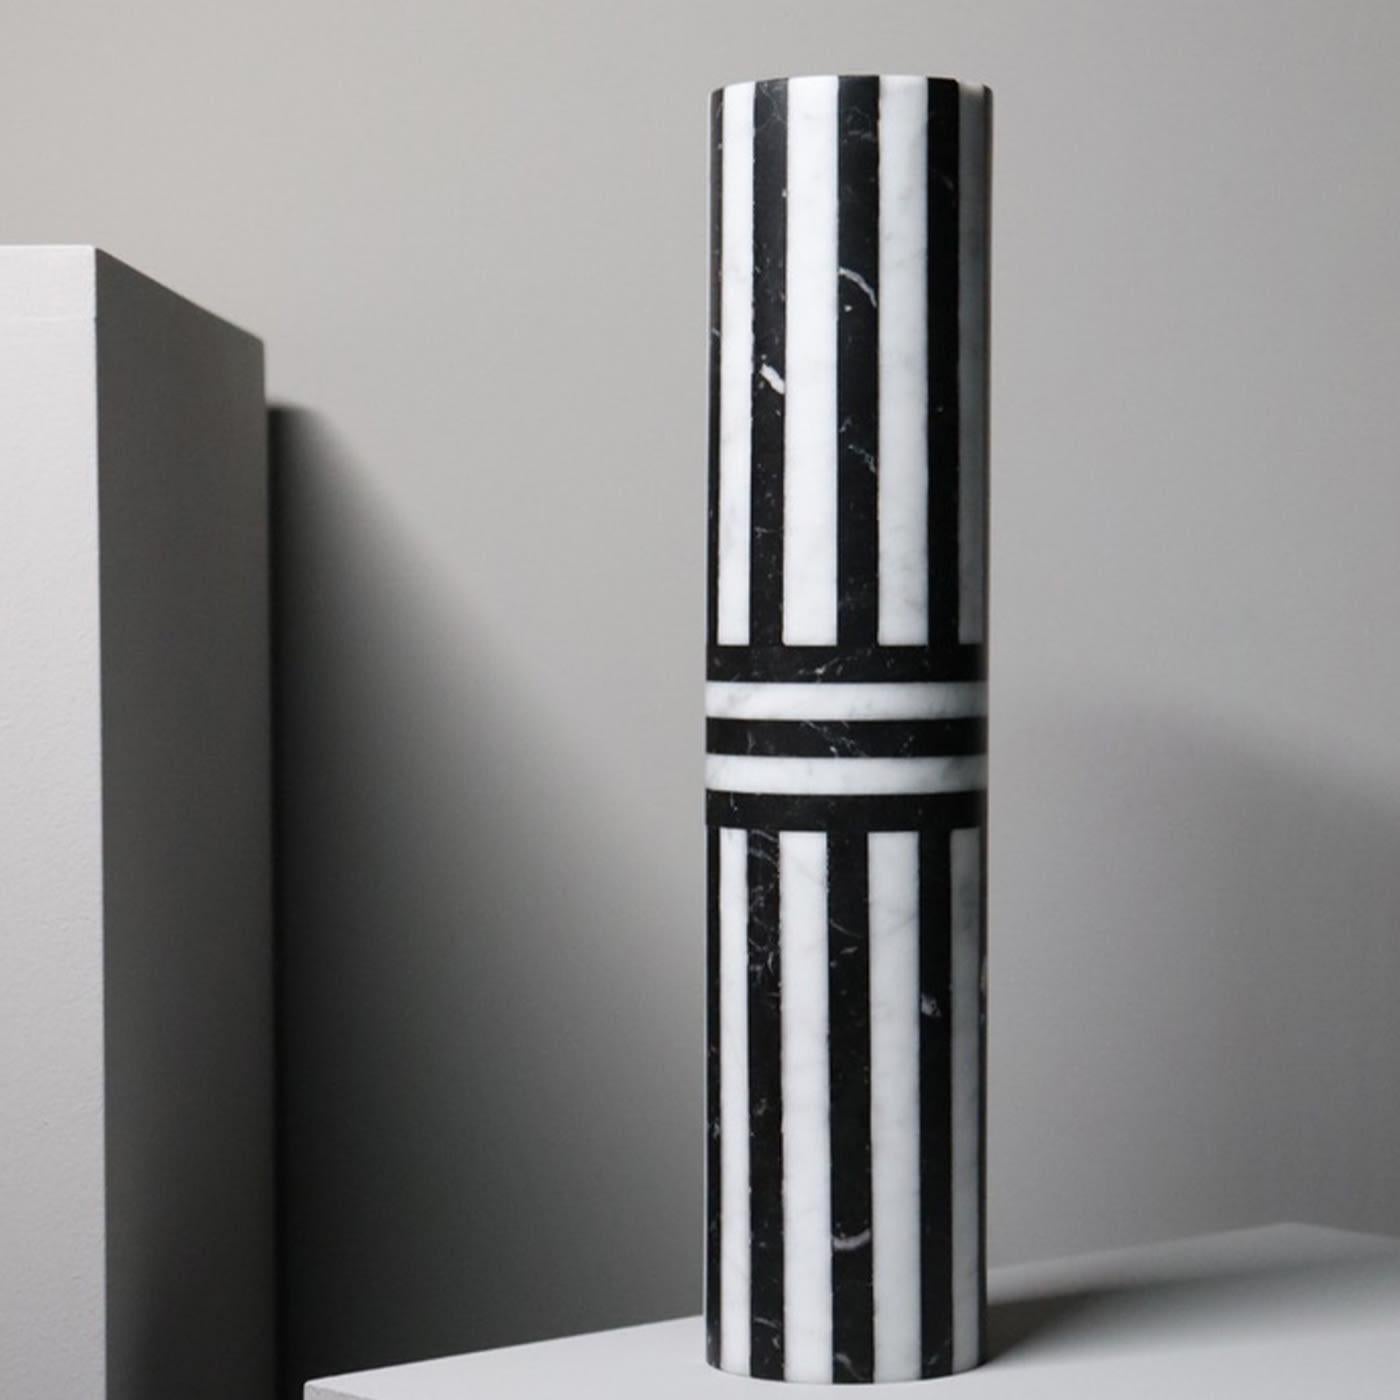 Introducing a new collection of vases, handcrafted in Italy from the highest quality stones. Bloom vases feature a solid cylindrical shape-enhancing striped pattern created by alternating white Arabescato and black Marquinia marbles. Conceived as a